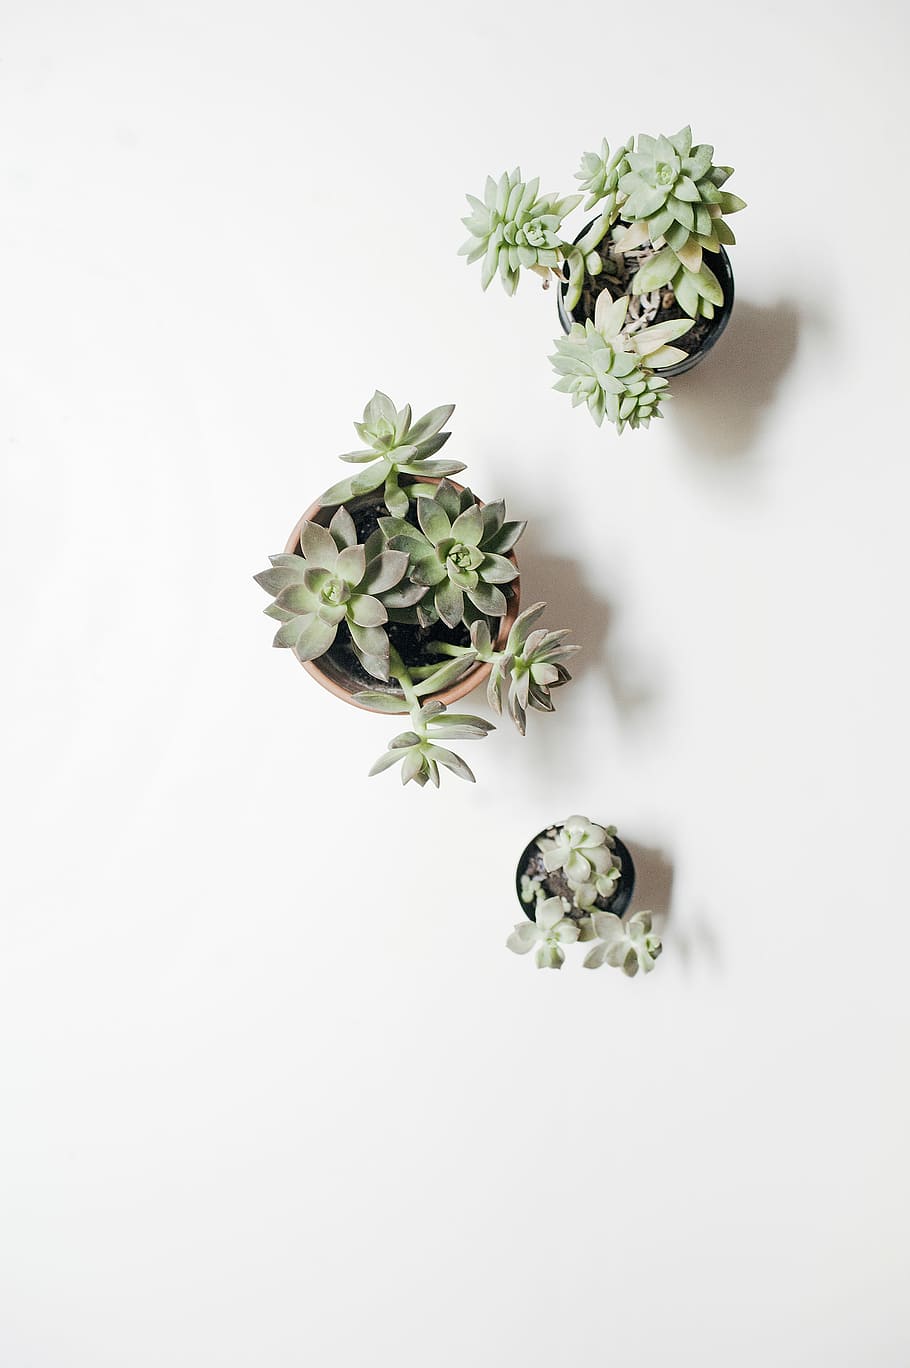 HD wallpaper: three green succulents in pots on white surface, gray, plants